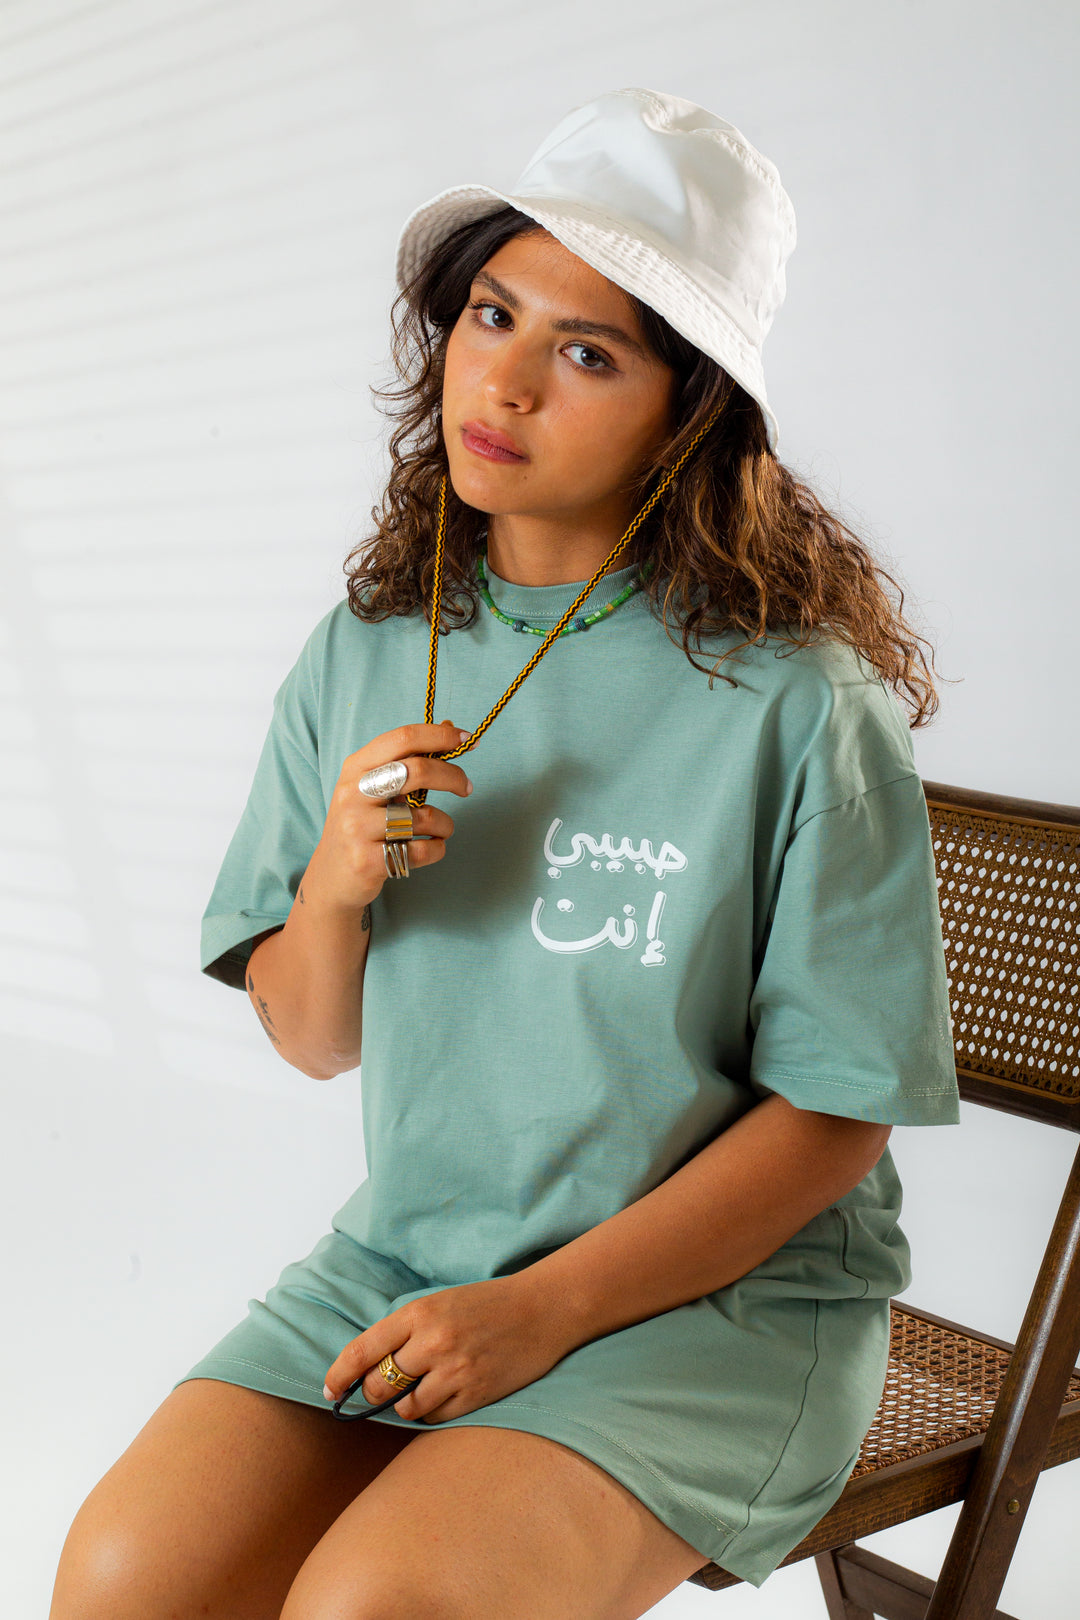 Young adult female wearing an Oversized mint T-dress with Habibi Enta written in Arabic حبيبي إنت and printed in white silkscreen on the side of the T-Dress along with a white hat on her head. Sitting on a wood chair.